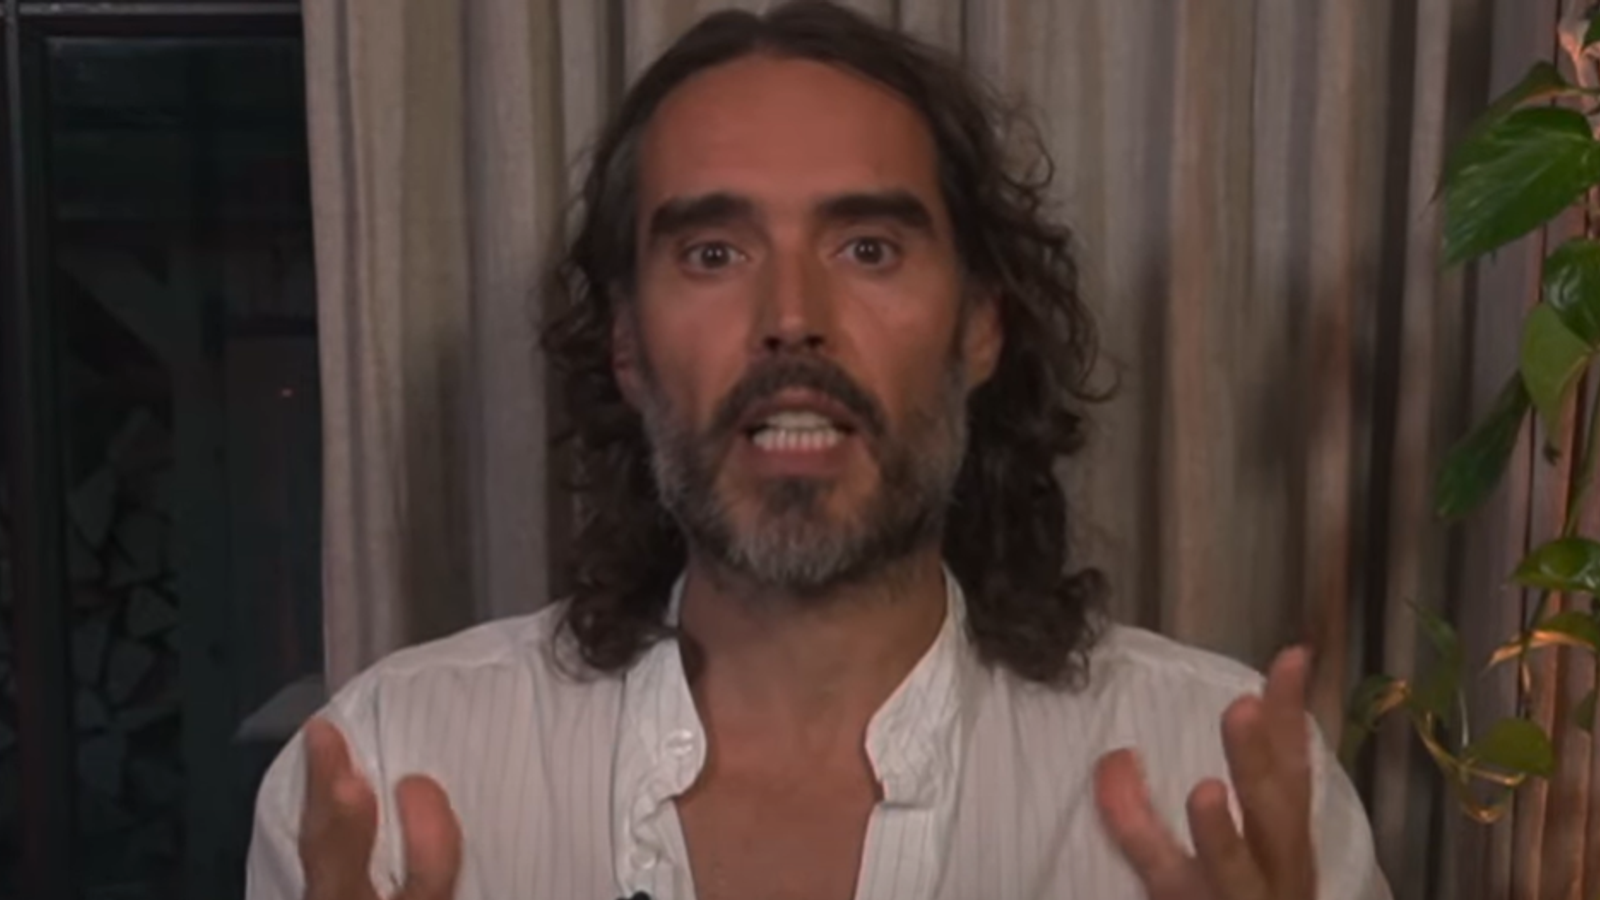 Russell Brand breaks his silence - telling followers it has been a 'distressing' week